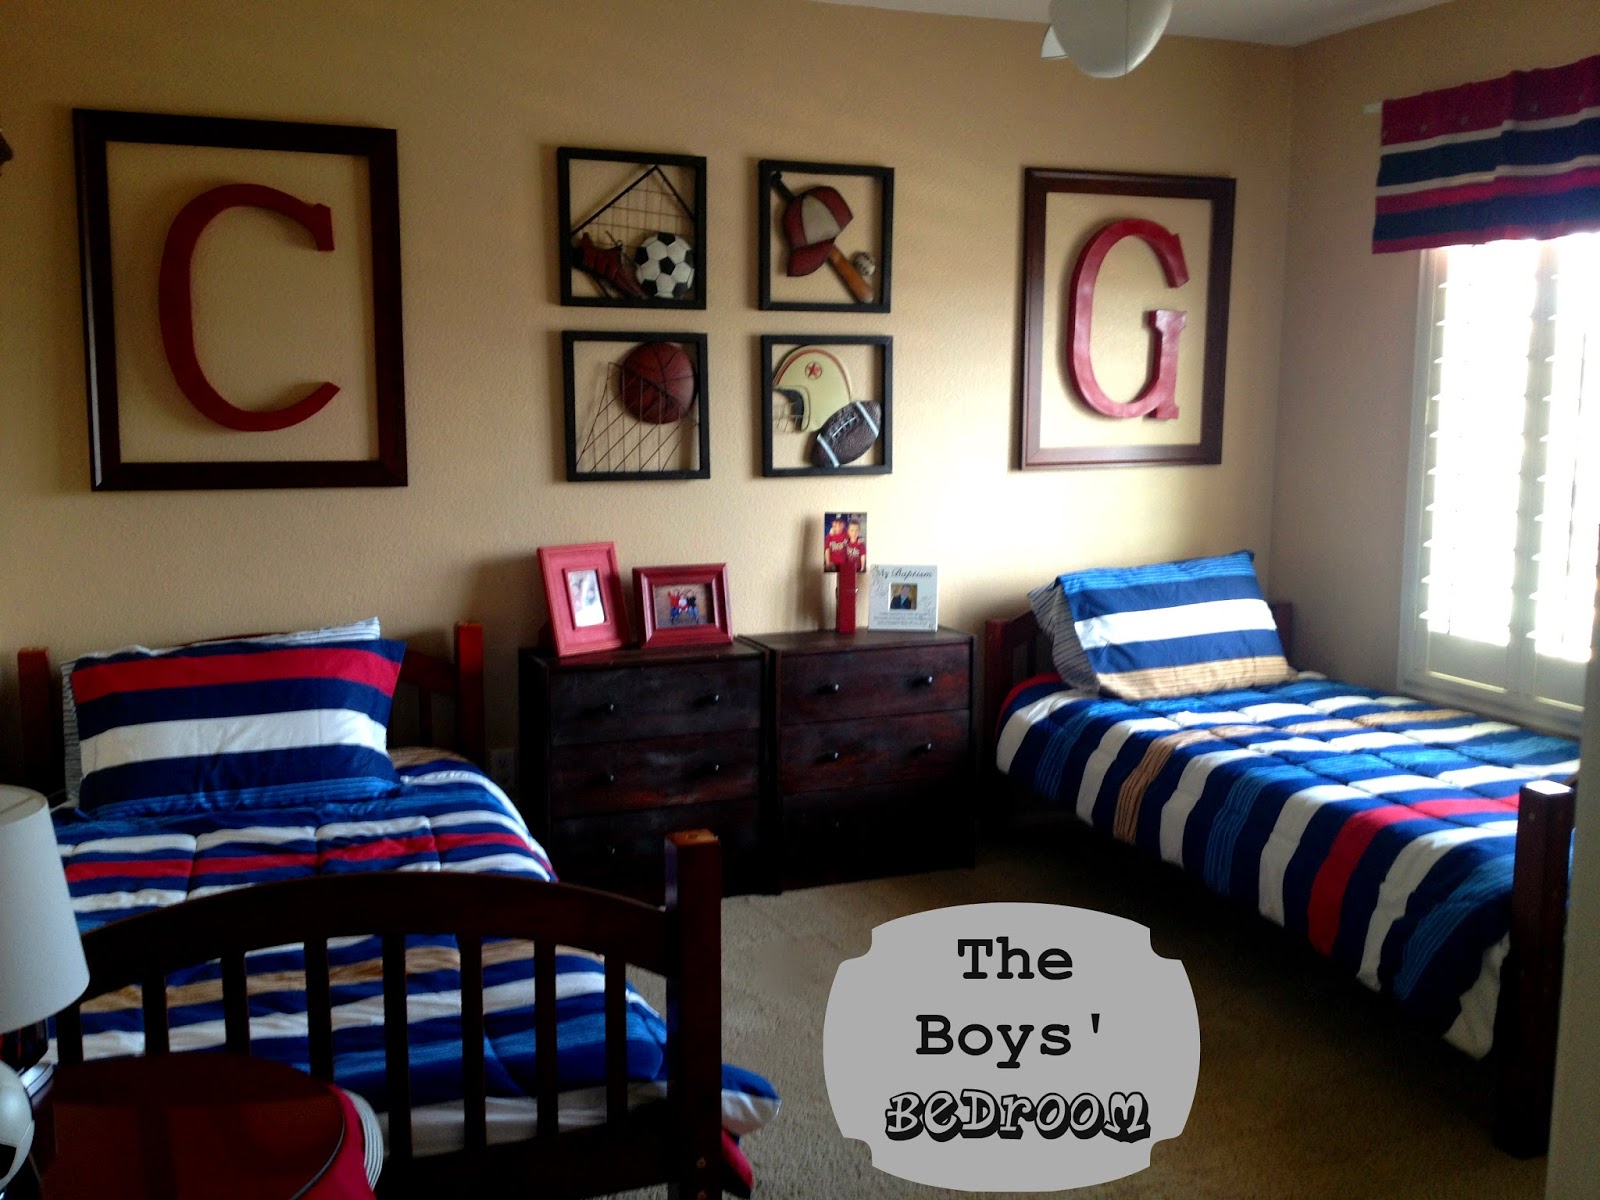 Marci Coombs: The Boys' Sports Themed Bedroom.